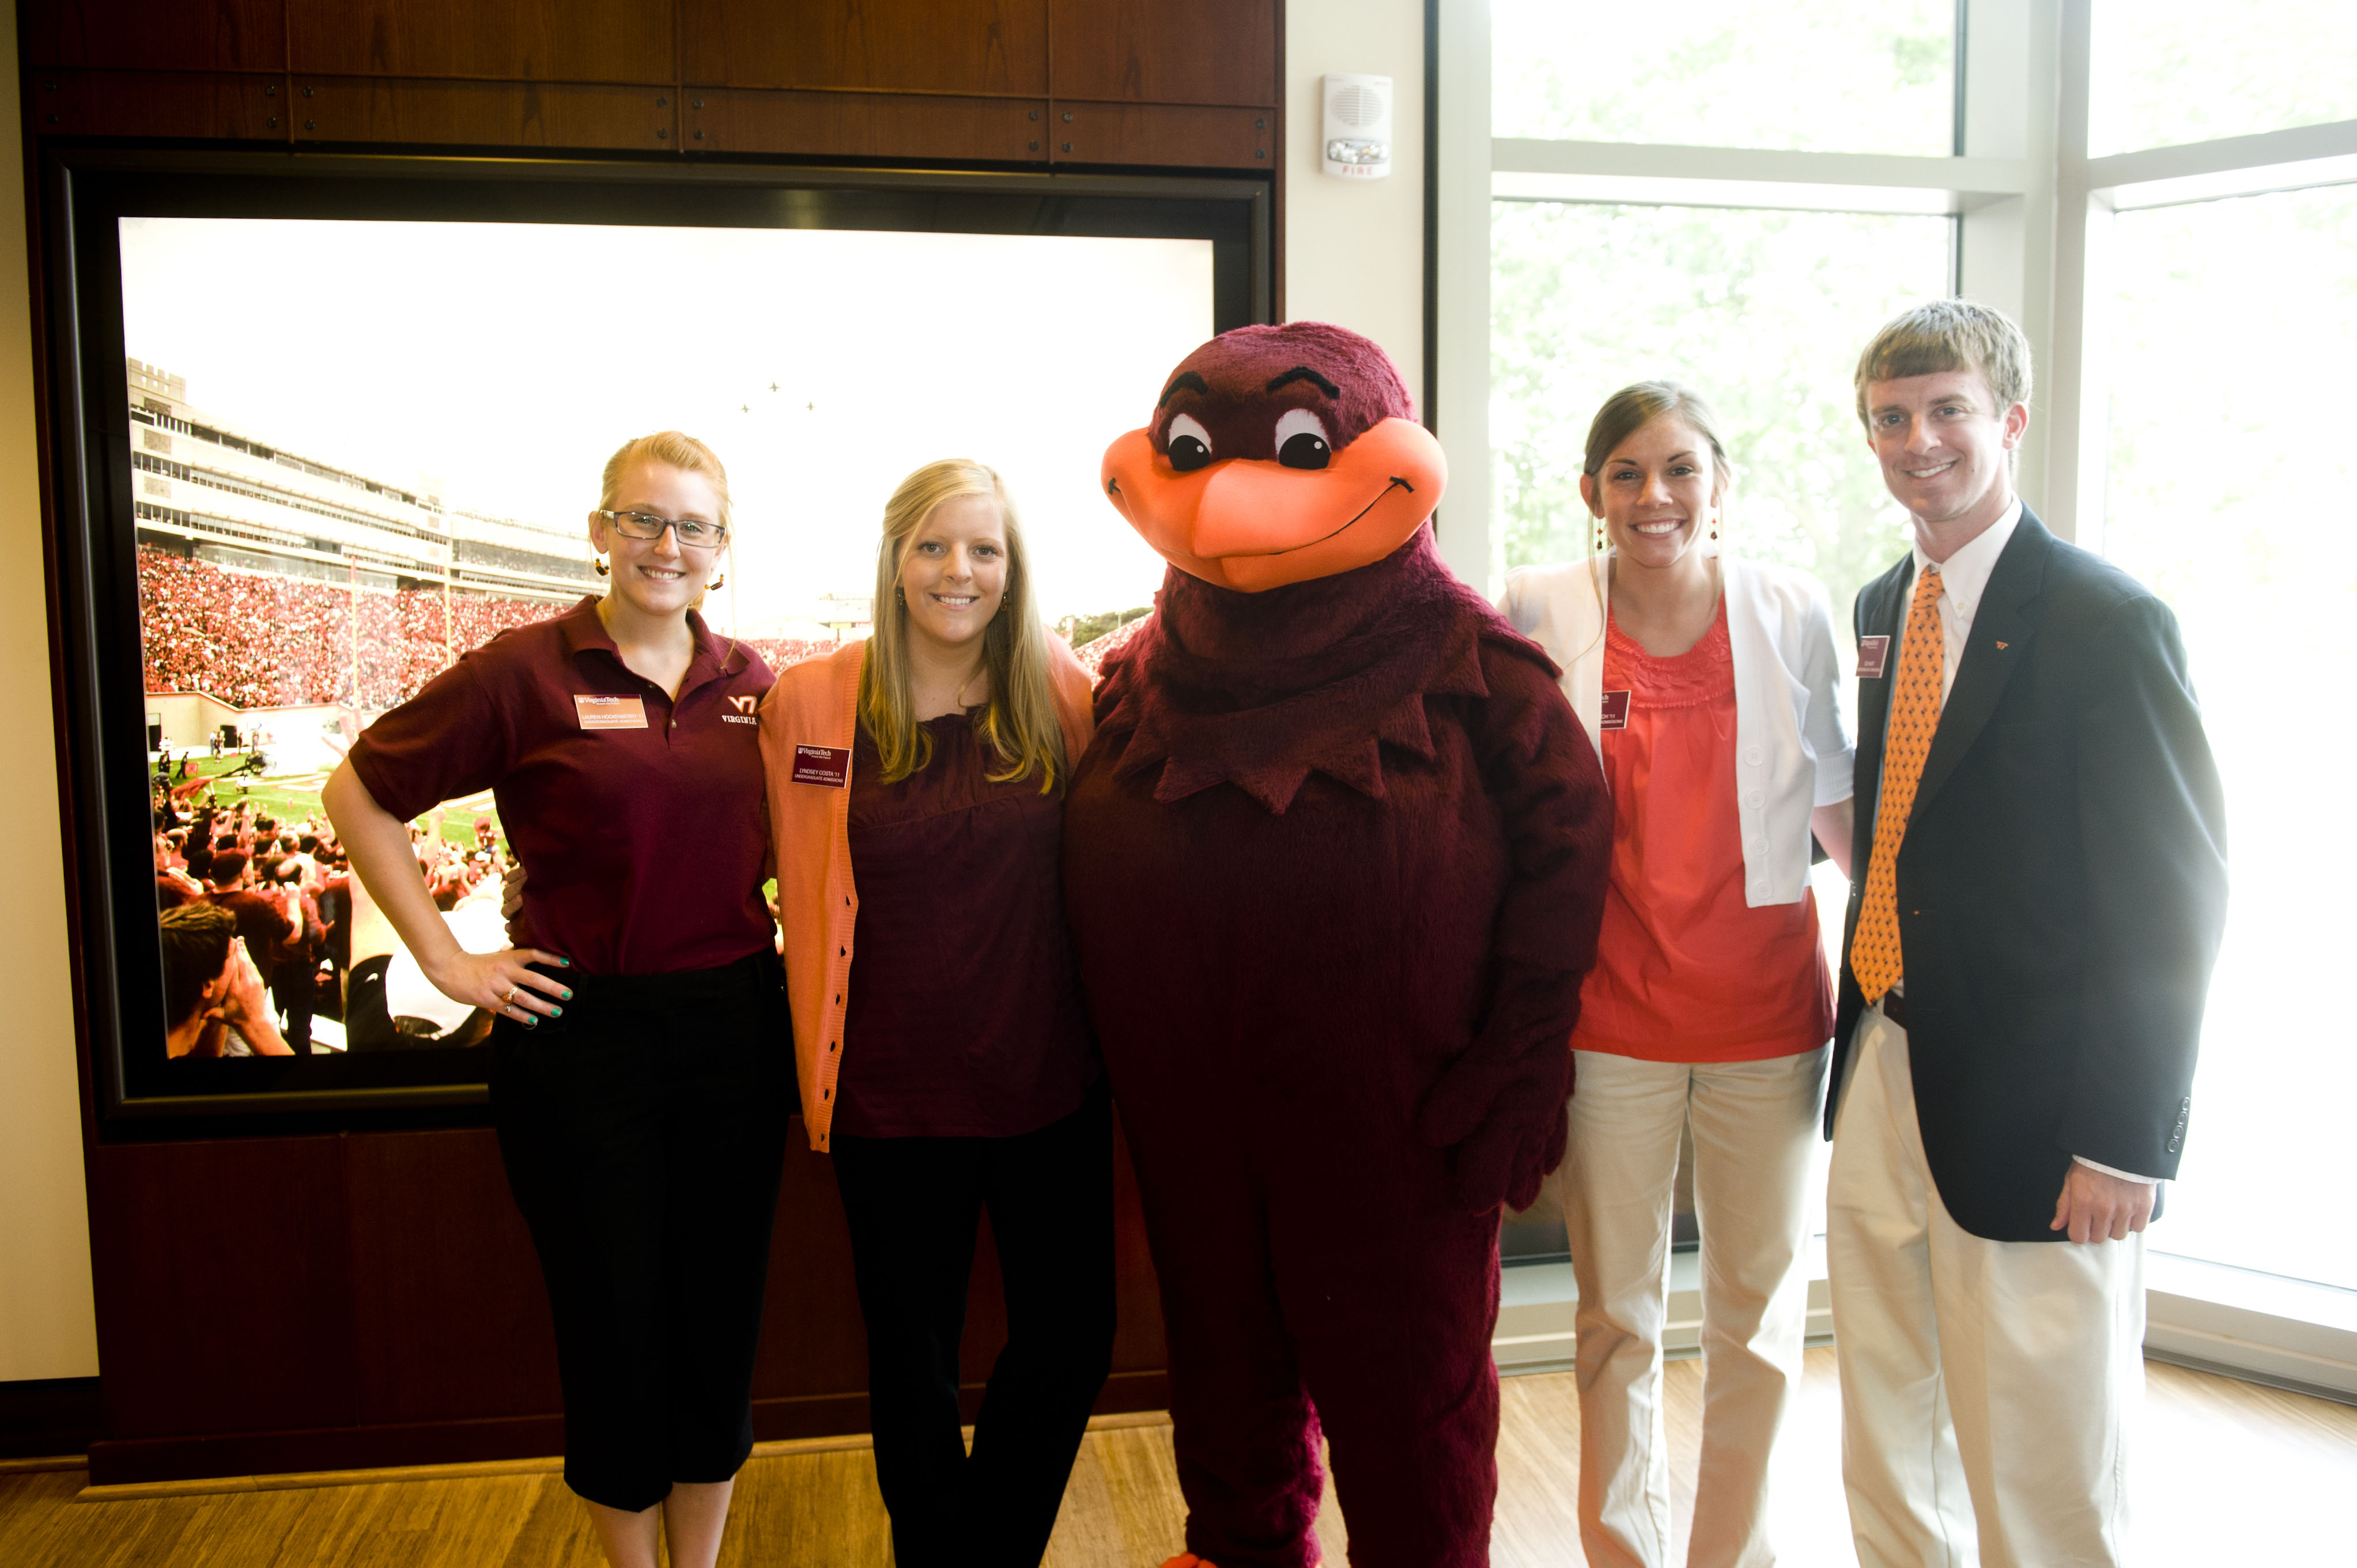 A life-size HokieBird exhibit allows fans to select one of three background images and snap their picture with the beloved mascot.